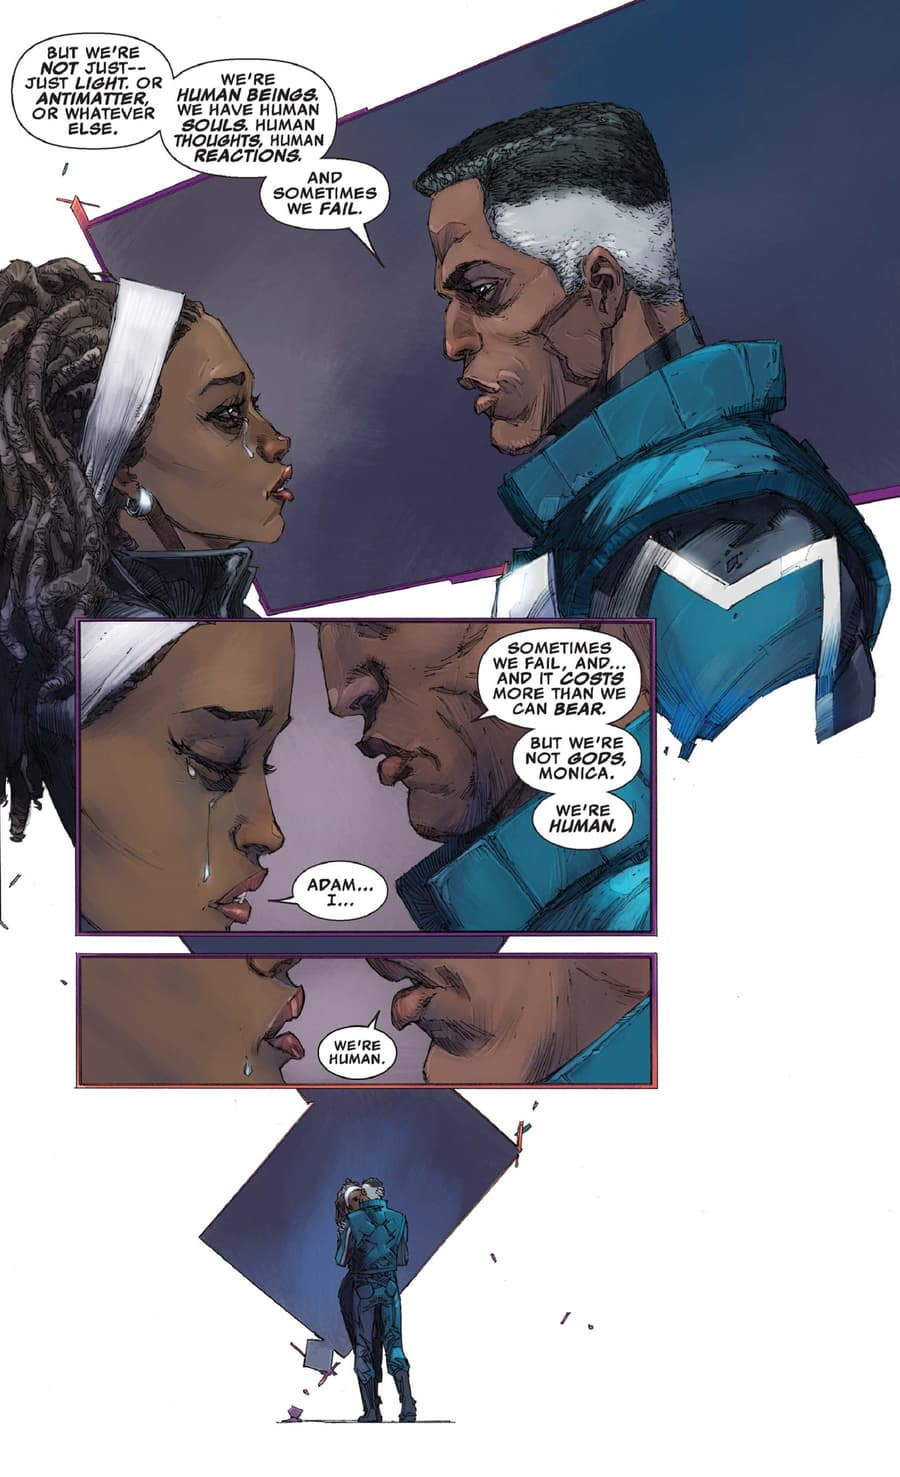 Monica and Blue Marvel embrace and kiss following a harrowing ordeal.